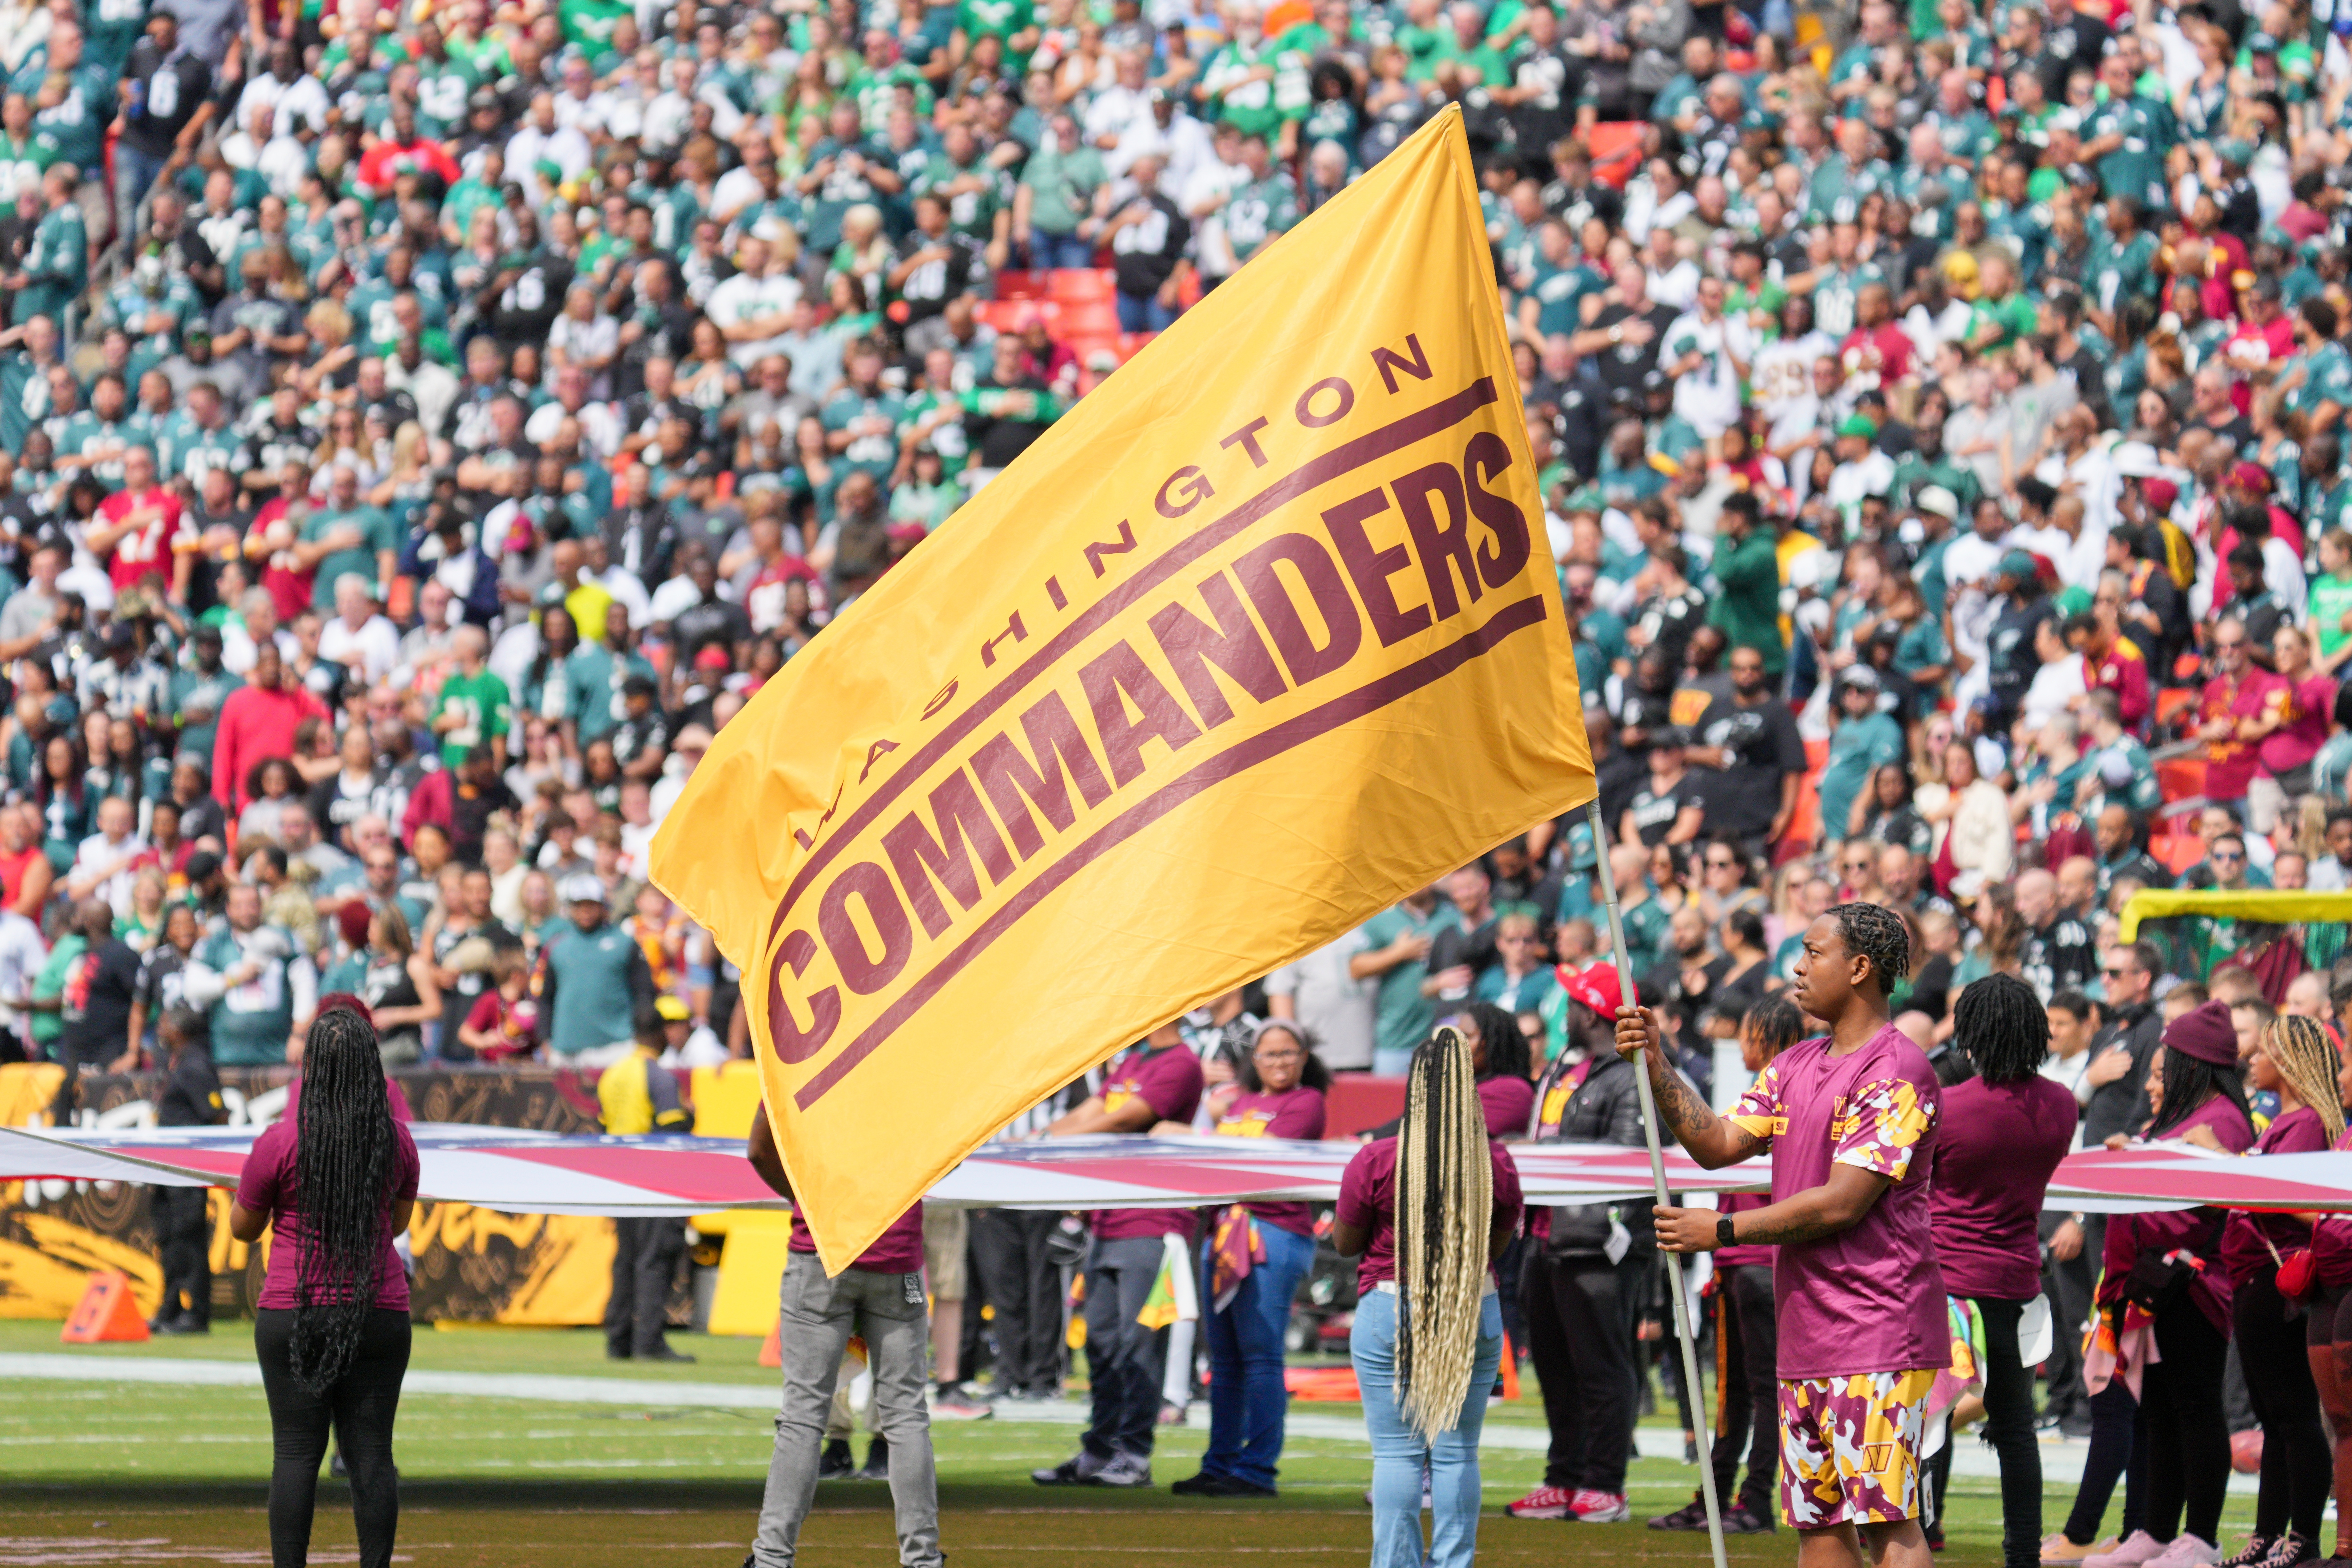 The Washington Commanders flag flies during the game against the Philadelphia Eagles at Fedex Field in Landover, Maryland, September 25, 2022. /CFP